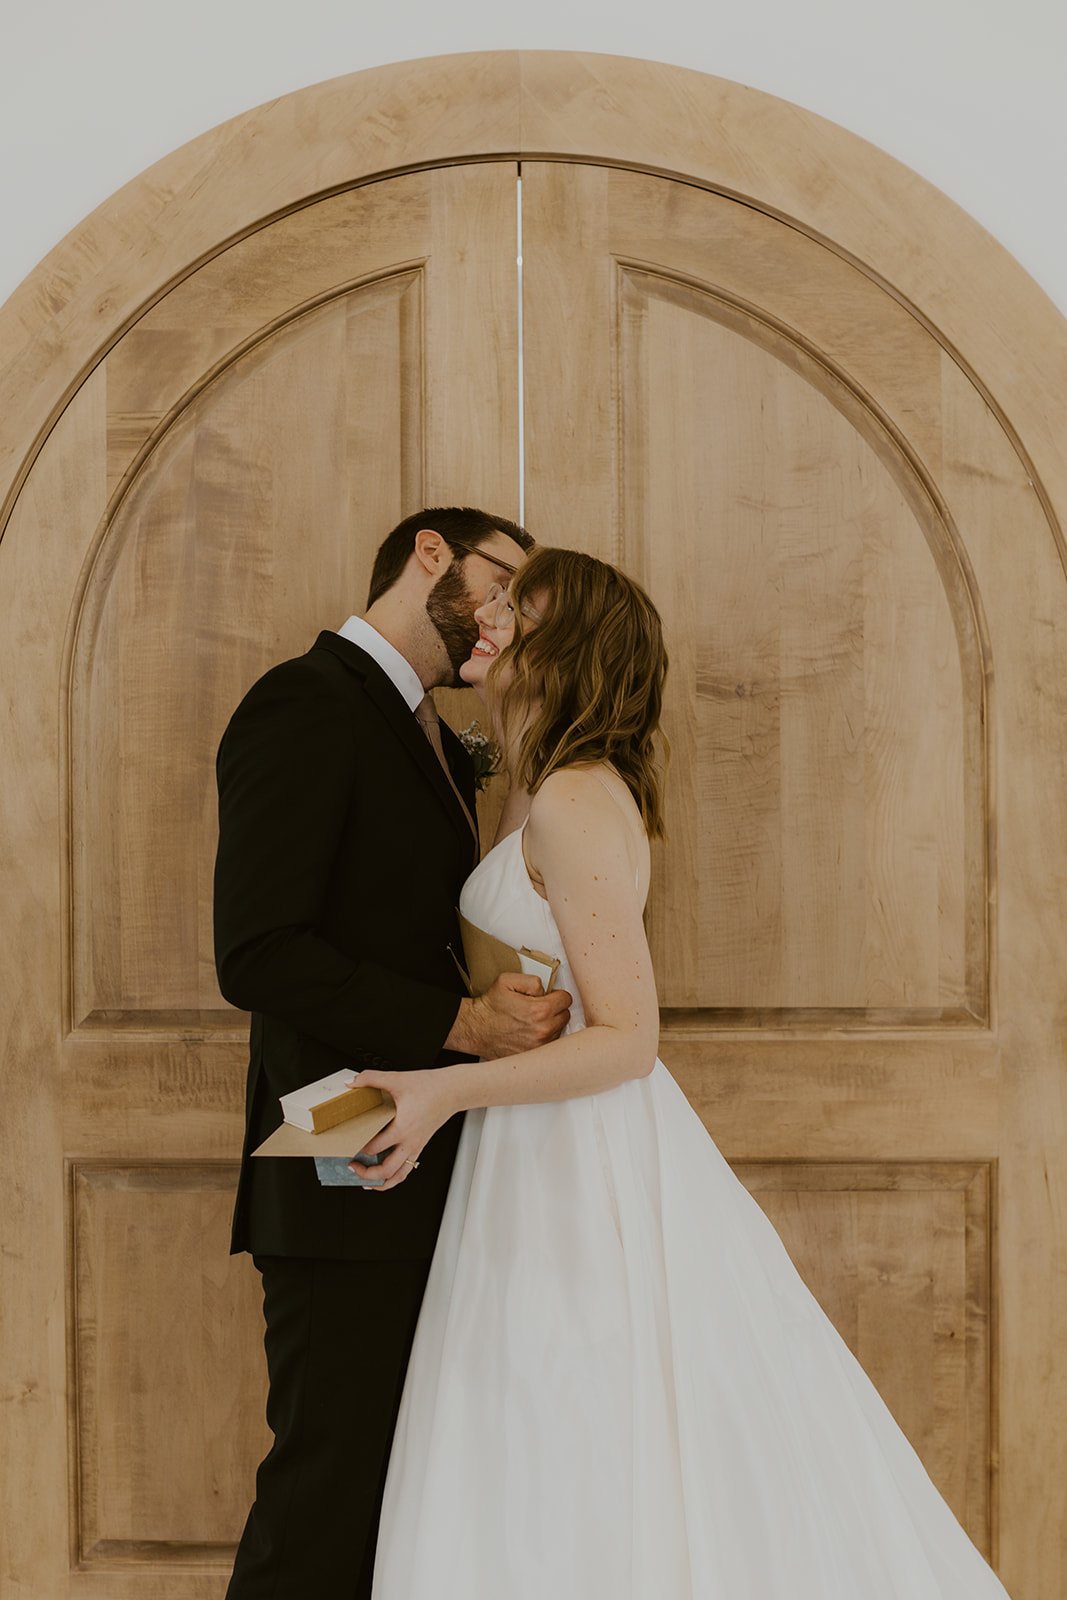 Groom kisses his bride on the cheek after sharing a token from one another. 